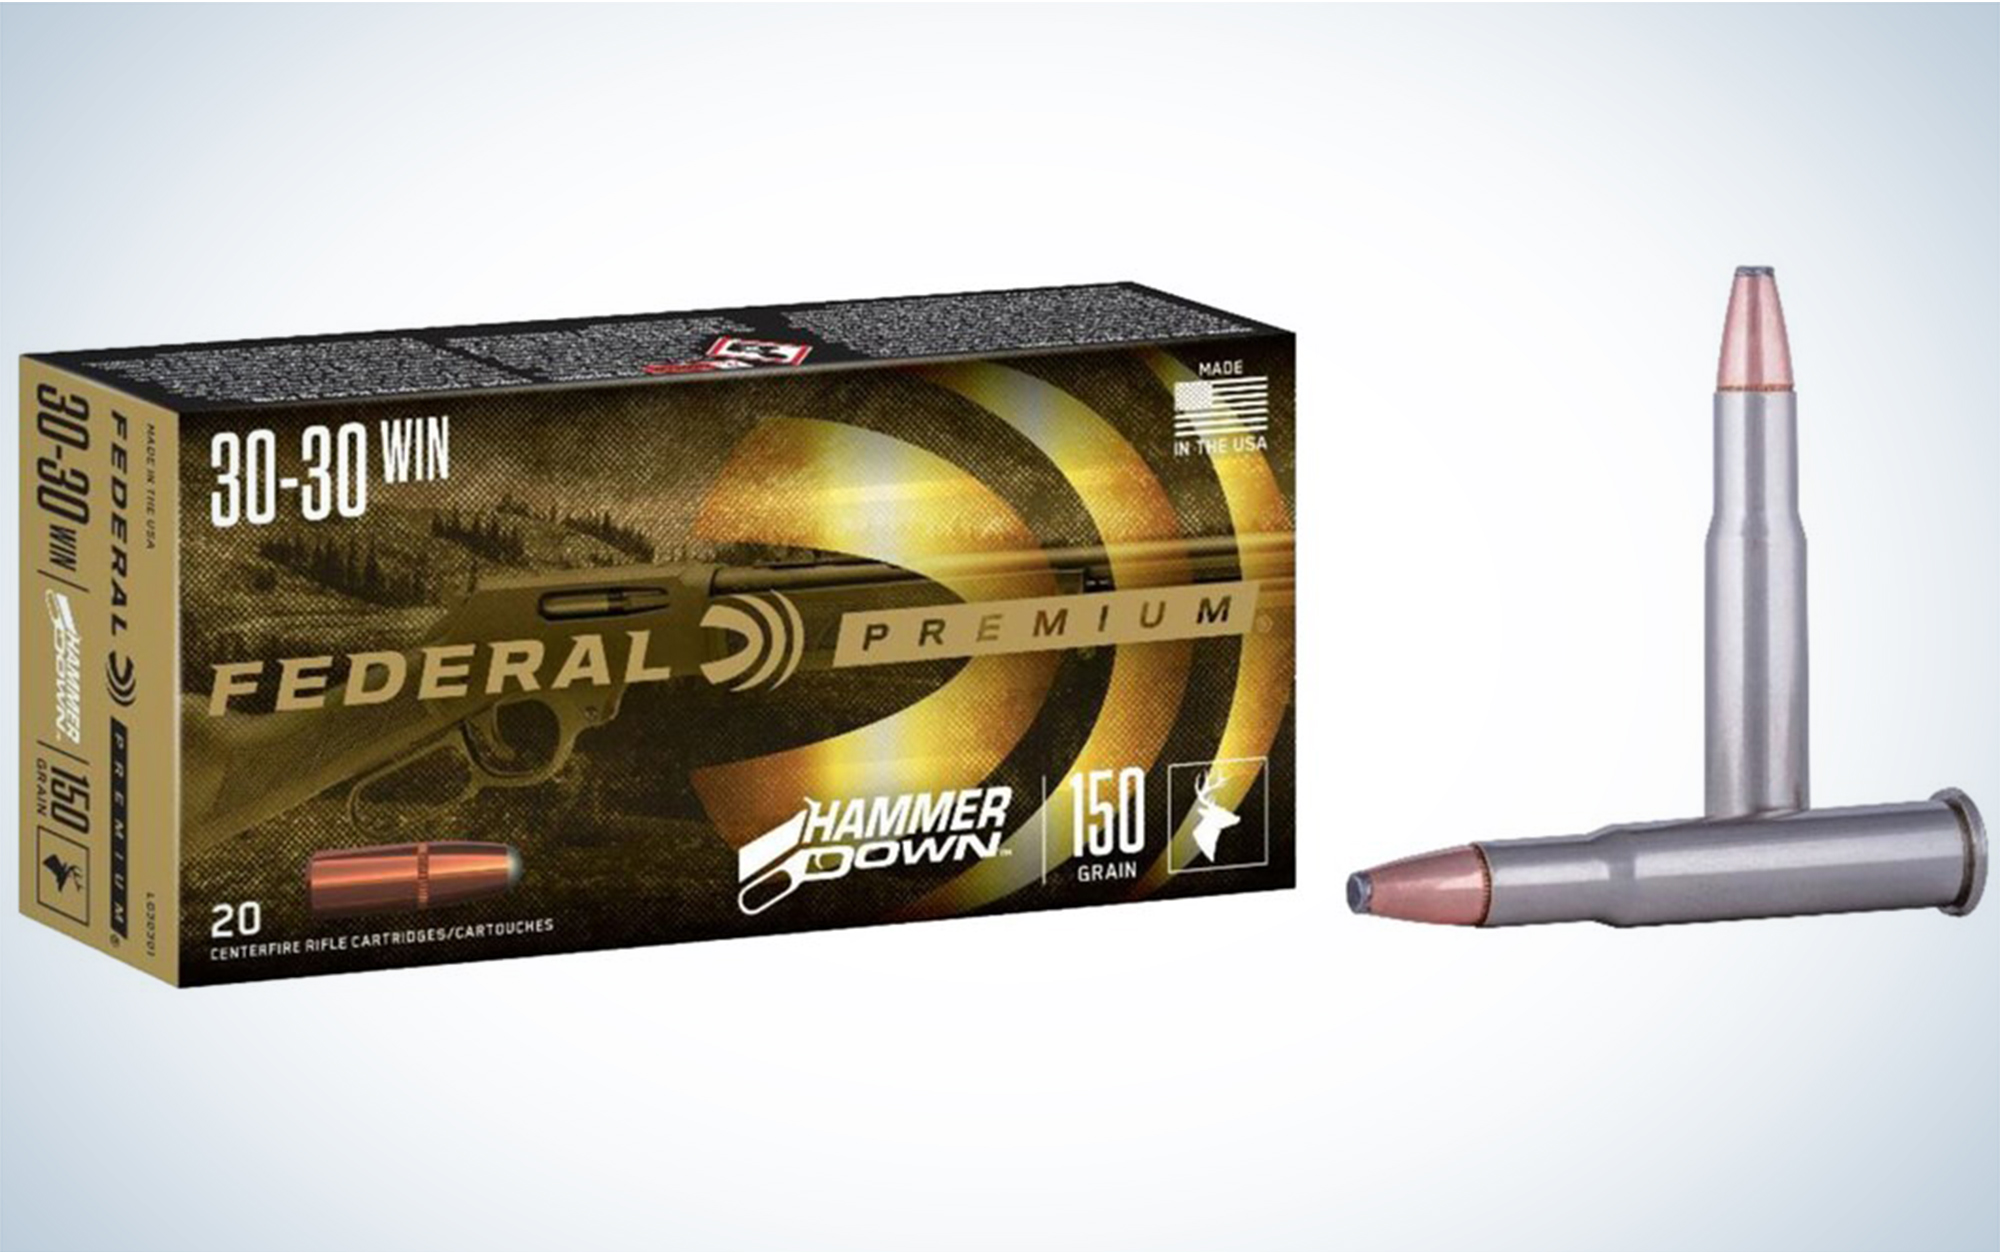 Federal HammerDown is one of the best .30-.30 ammunition.